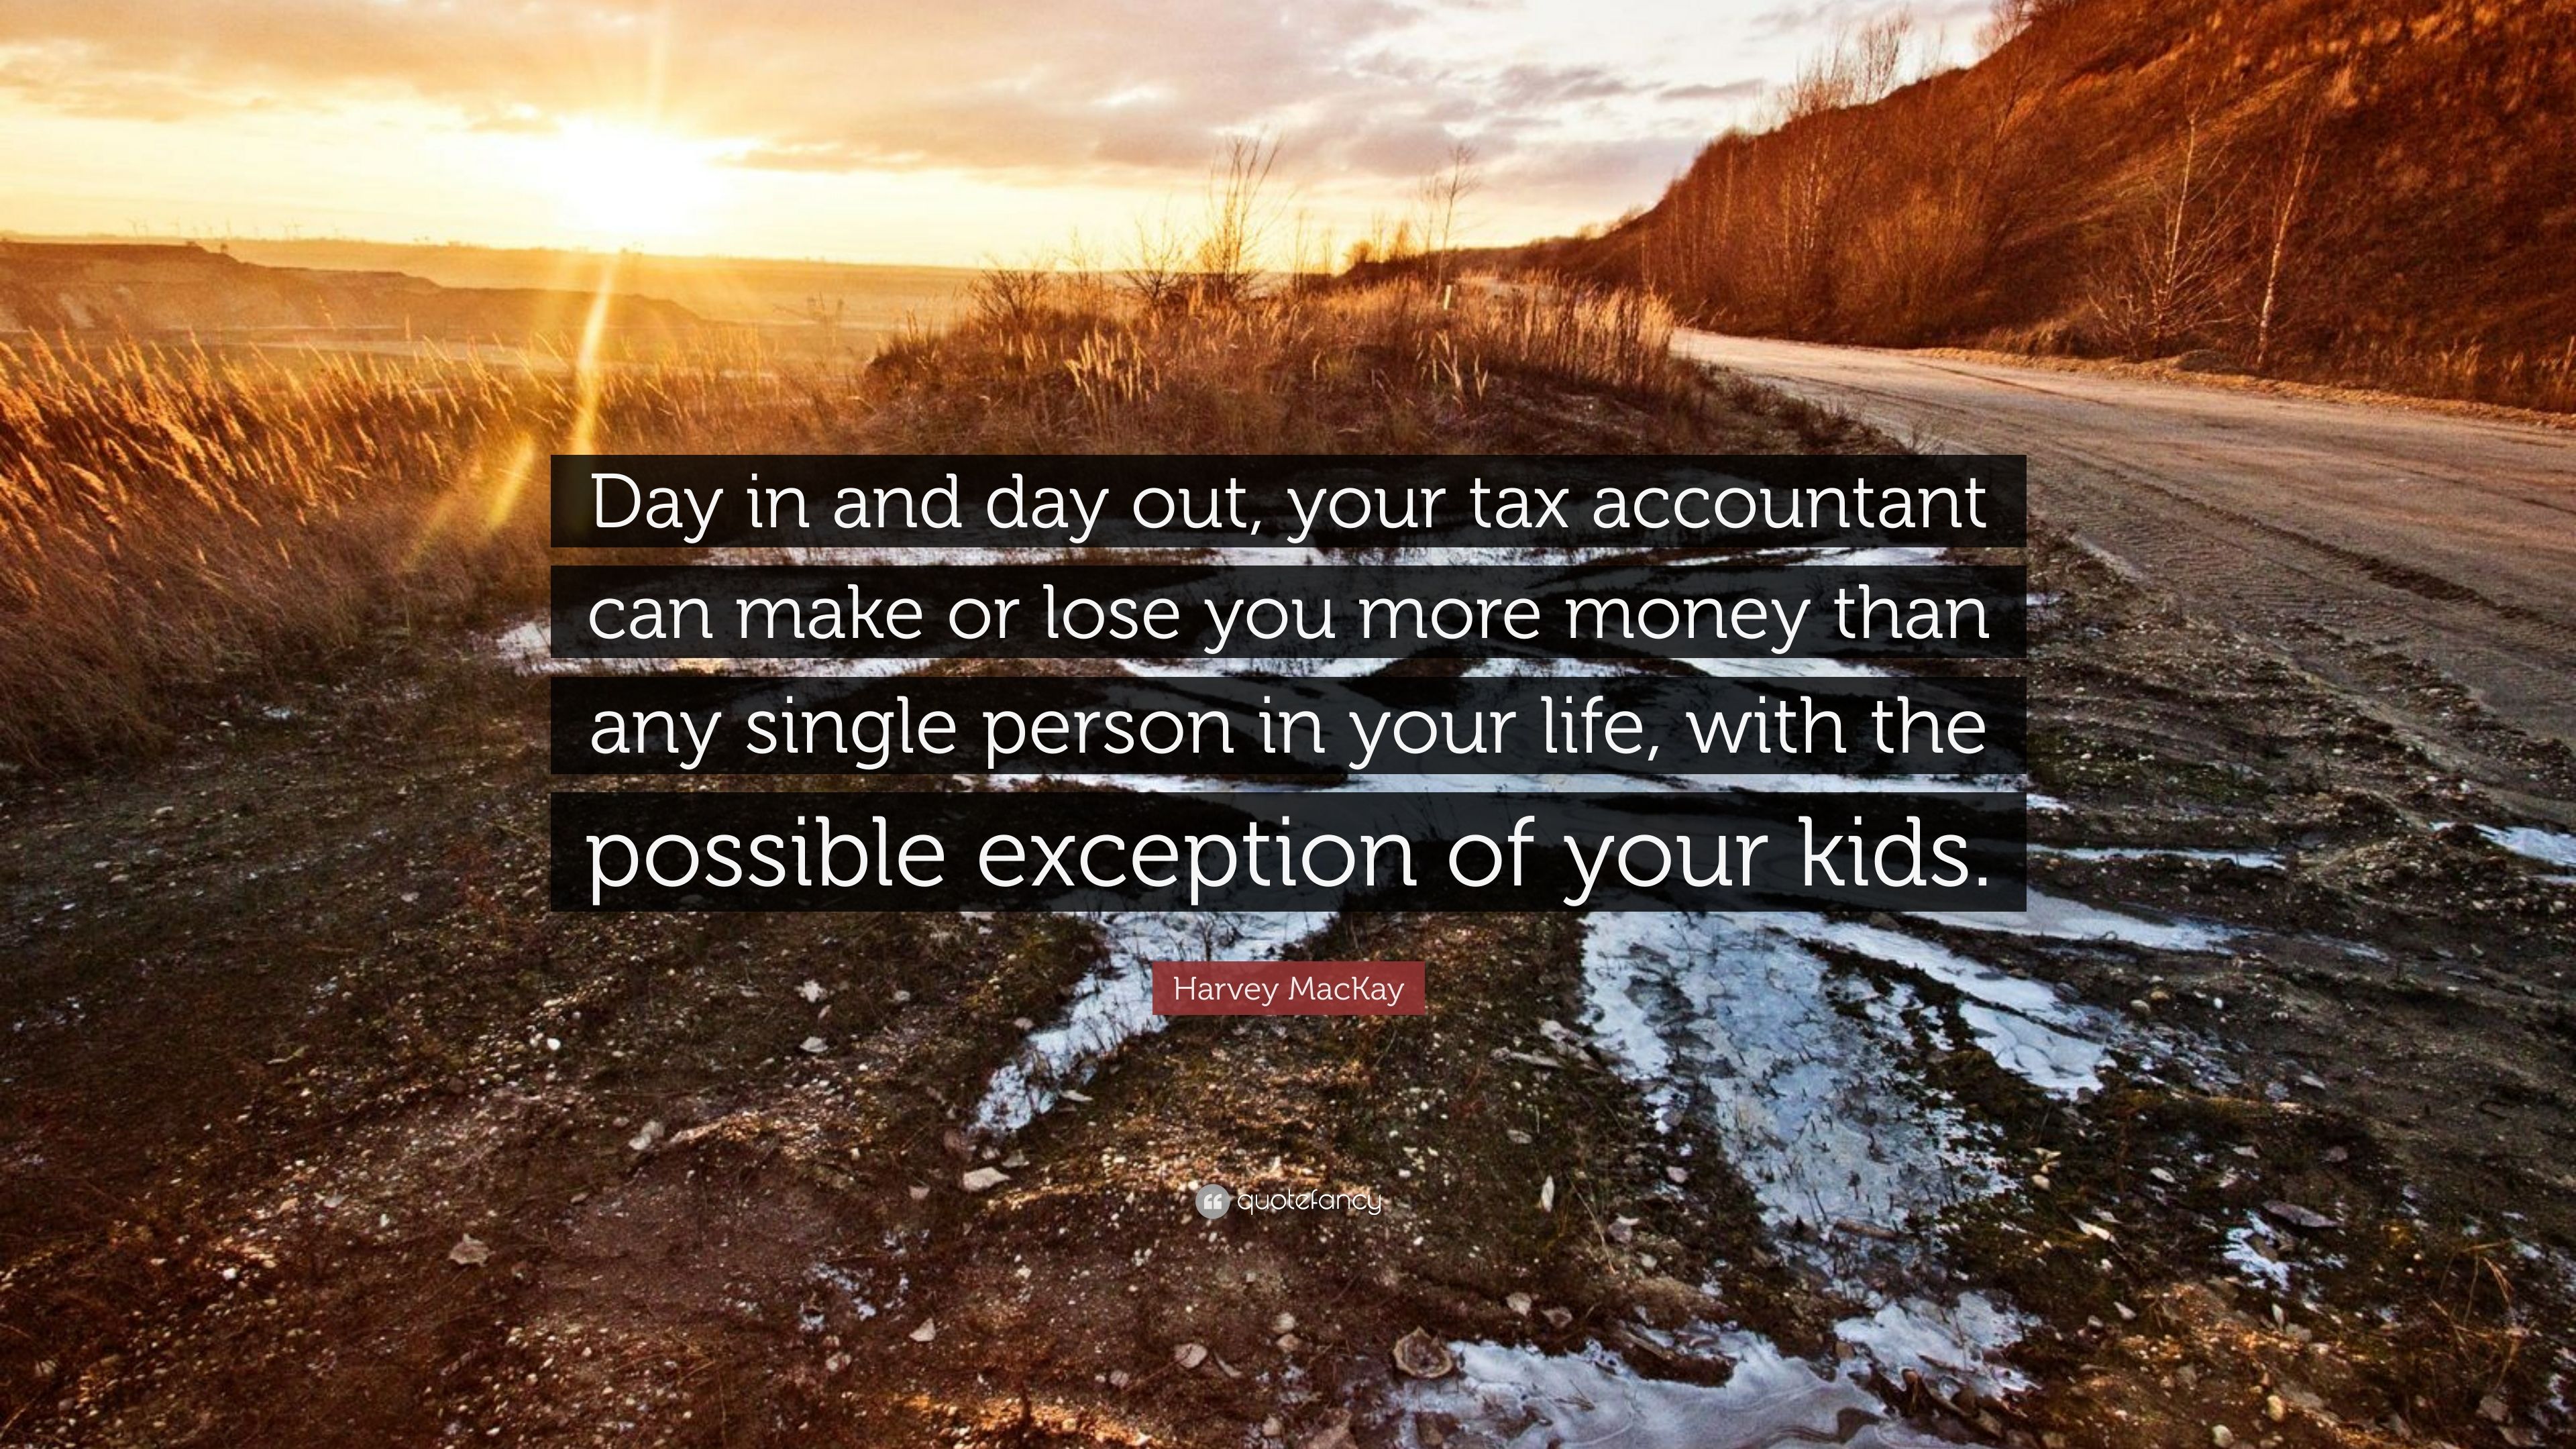 Harvey MacKay Quote: “Day in and day out, your tax accountant can